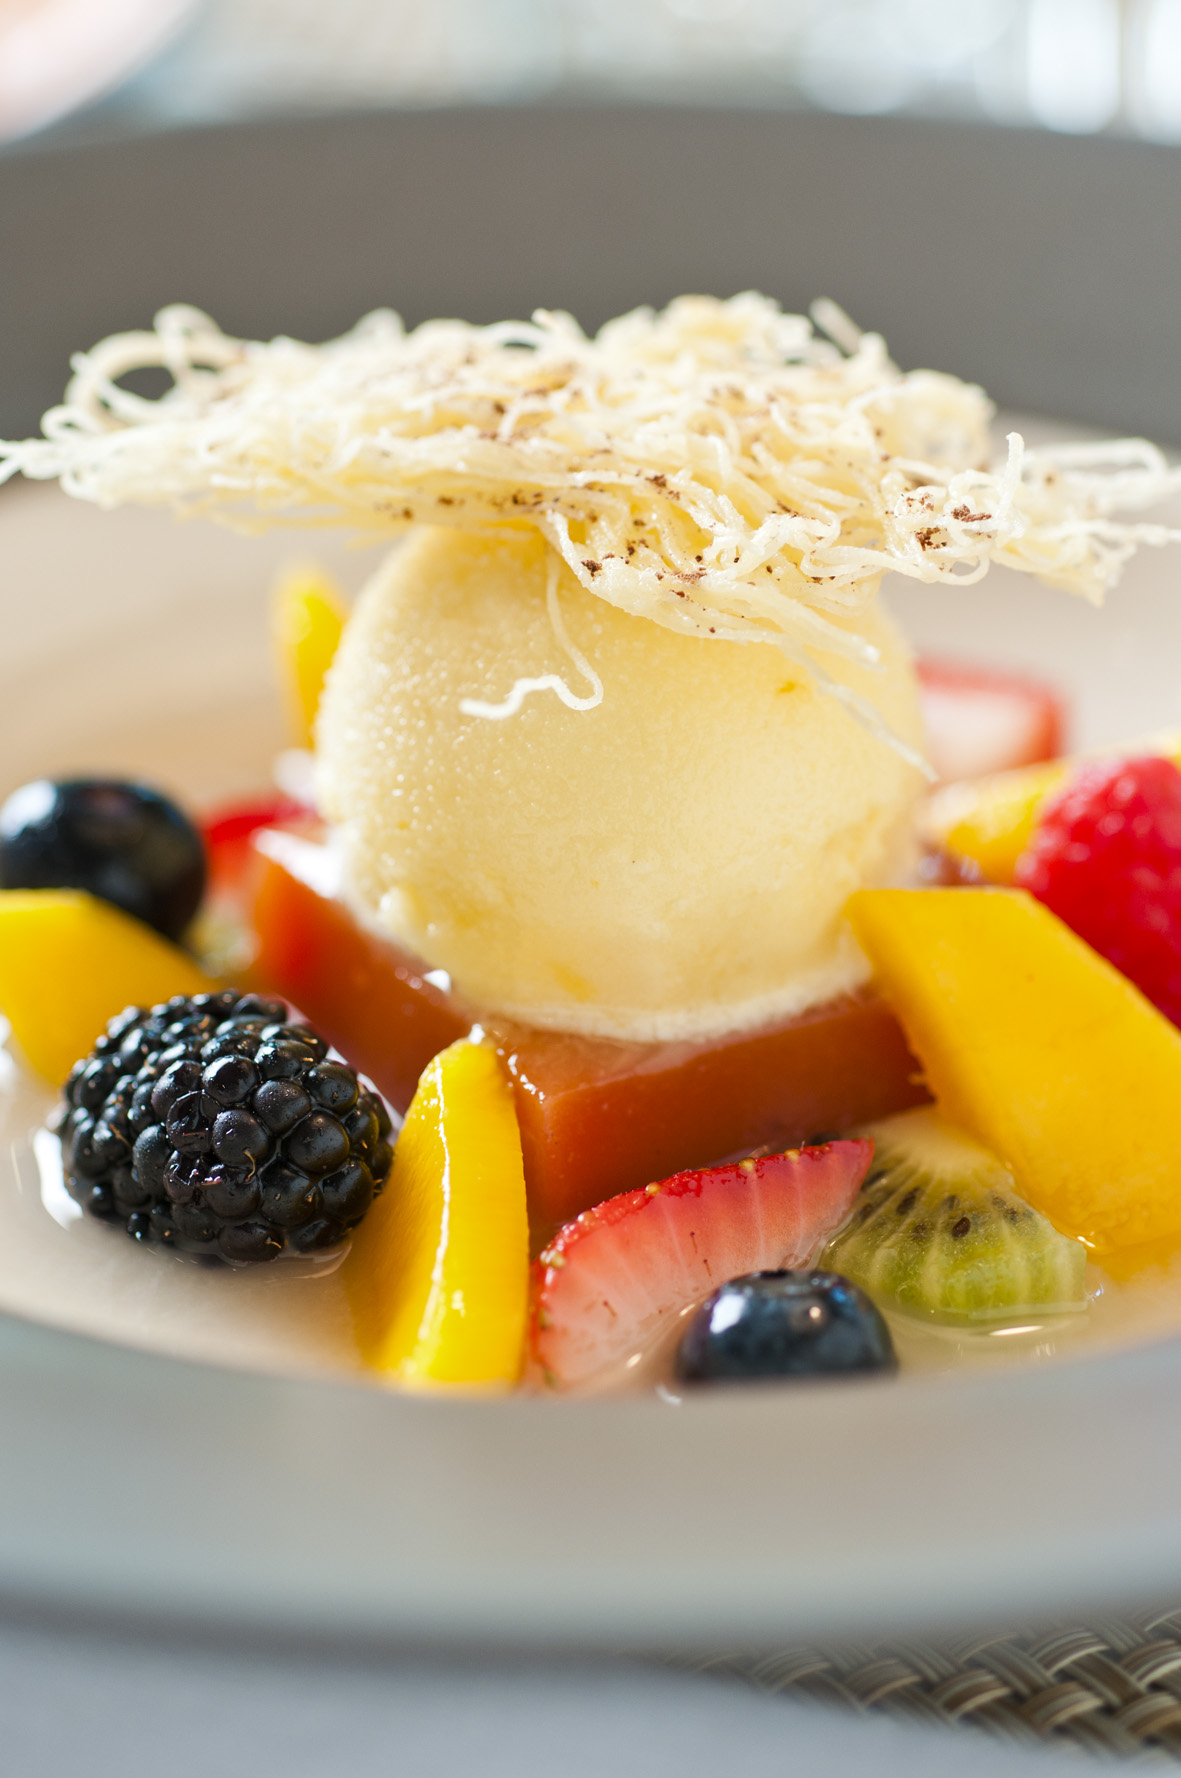 dessert-lychee-soup-with-summer-fruits-exotic-fruit-cube-and-orange-sherbet